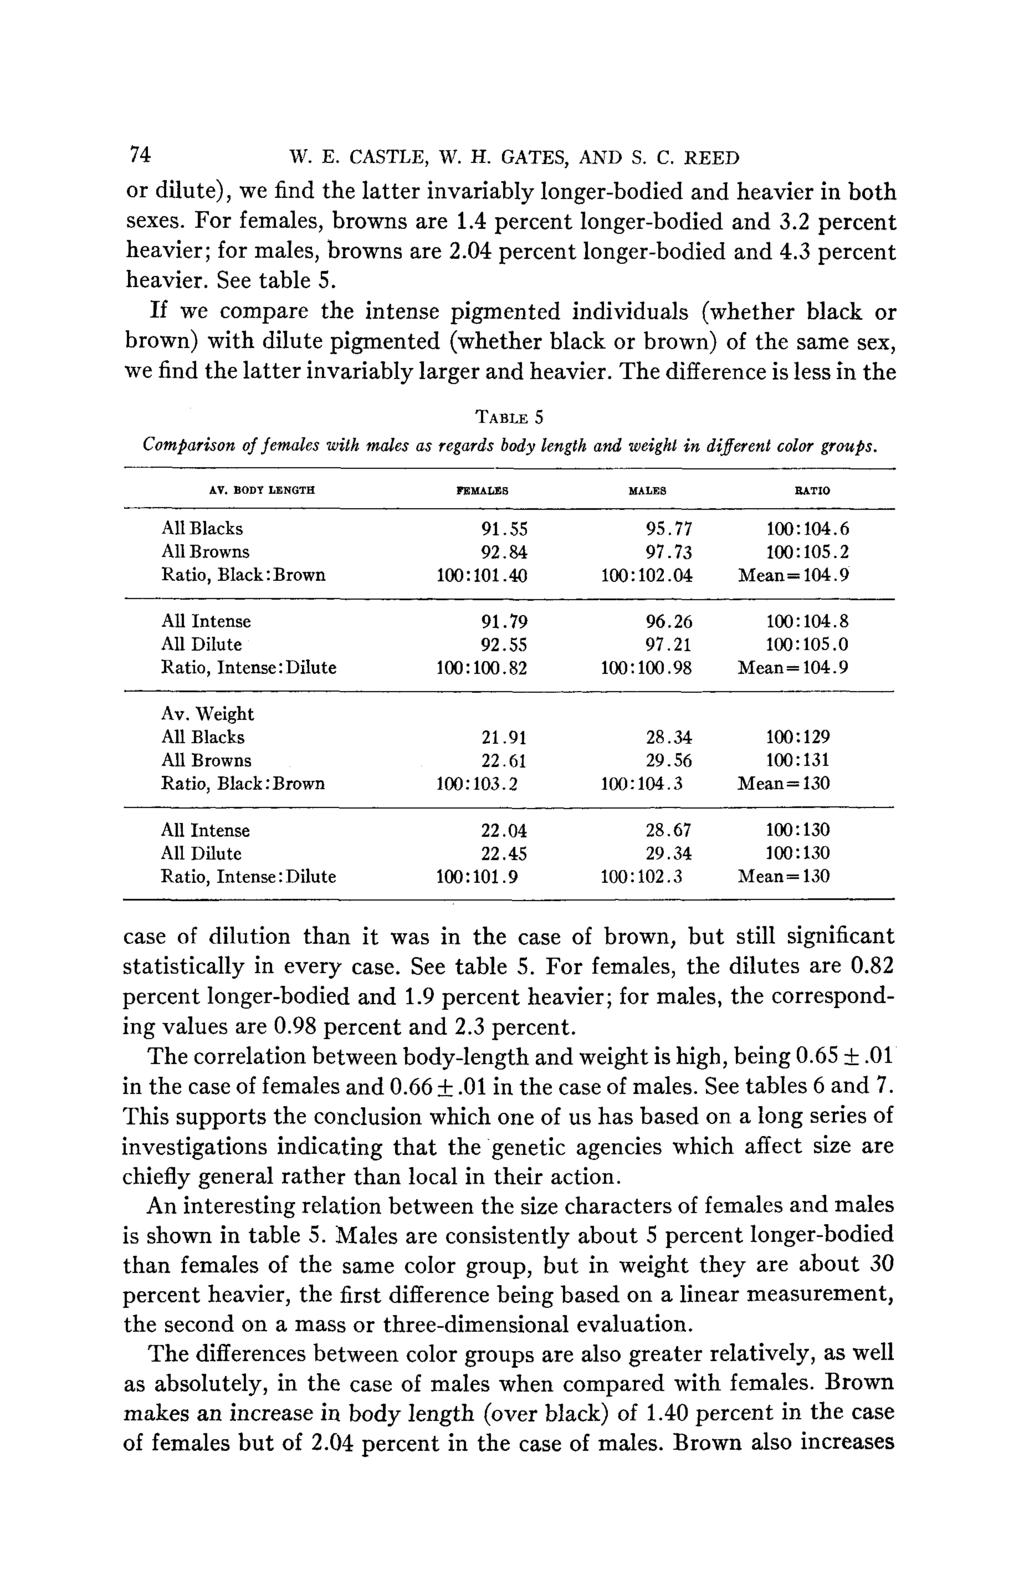 74 W. E. CASTLE, W. H. GATES, AND S. C. REED or dilute), we find the latter invariably longer-bodied and heavier in both sexes. For feales, browns are 1.4 percent longer-bodied and.